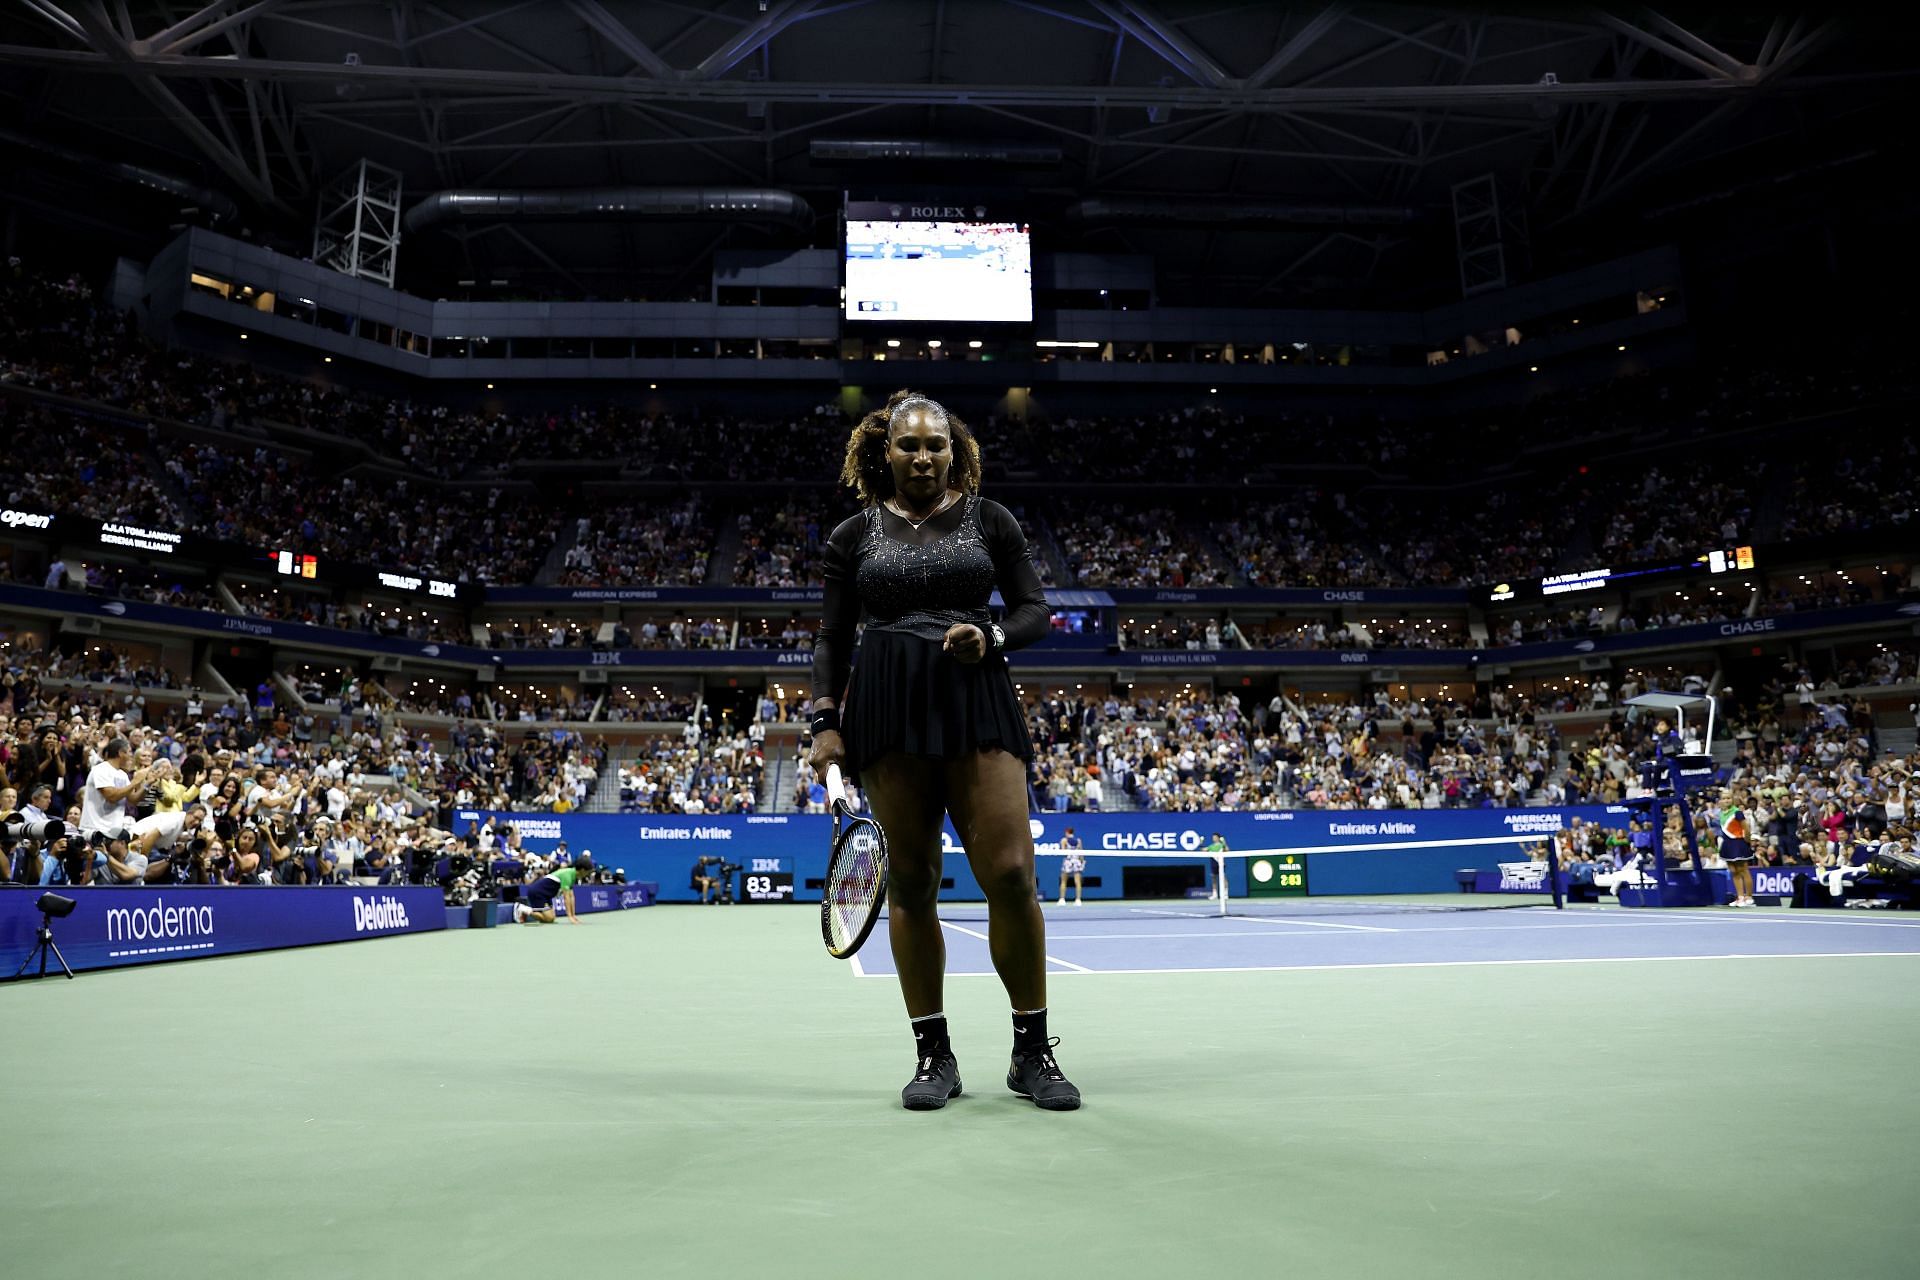 Serena lost to Ajla Tomljanovic in the third round of the US Open